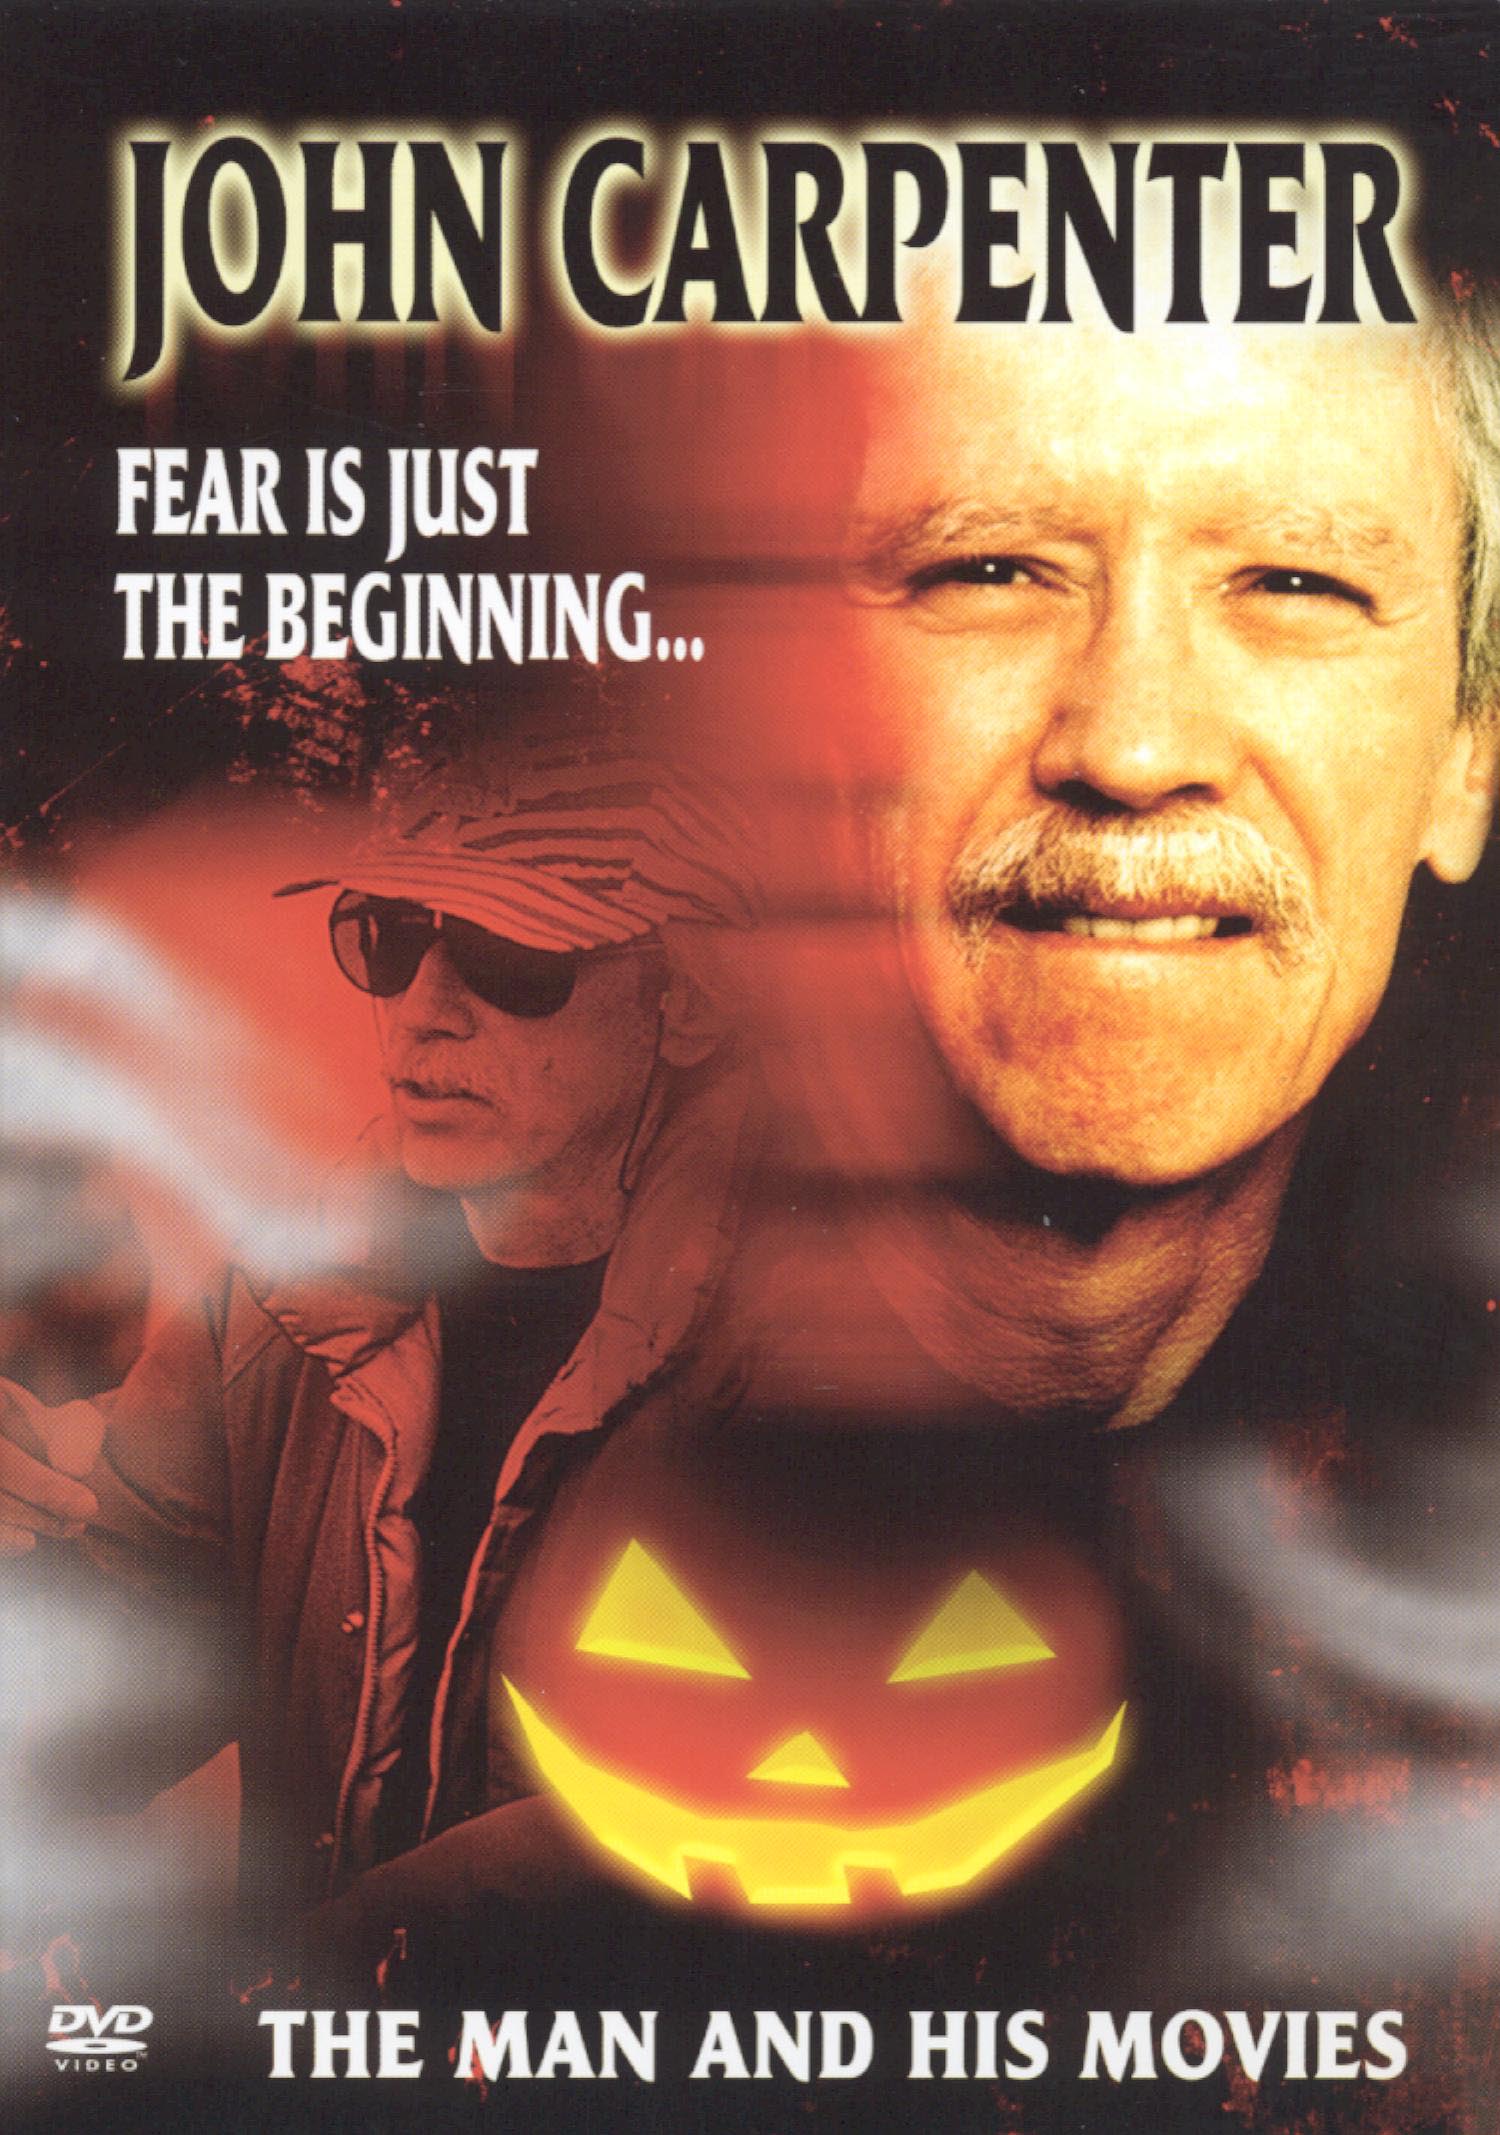 John Carpenter: Fear Is Just the Beginning... The Man and His Movies (2004) starring Adrienne Barbeau on DVD on DVD